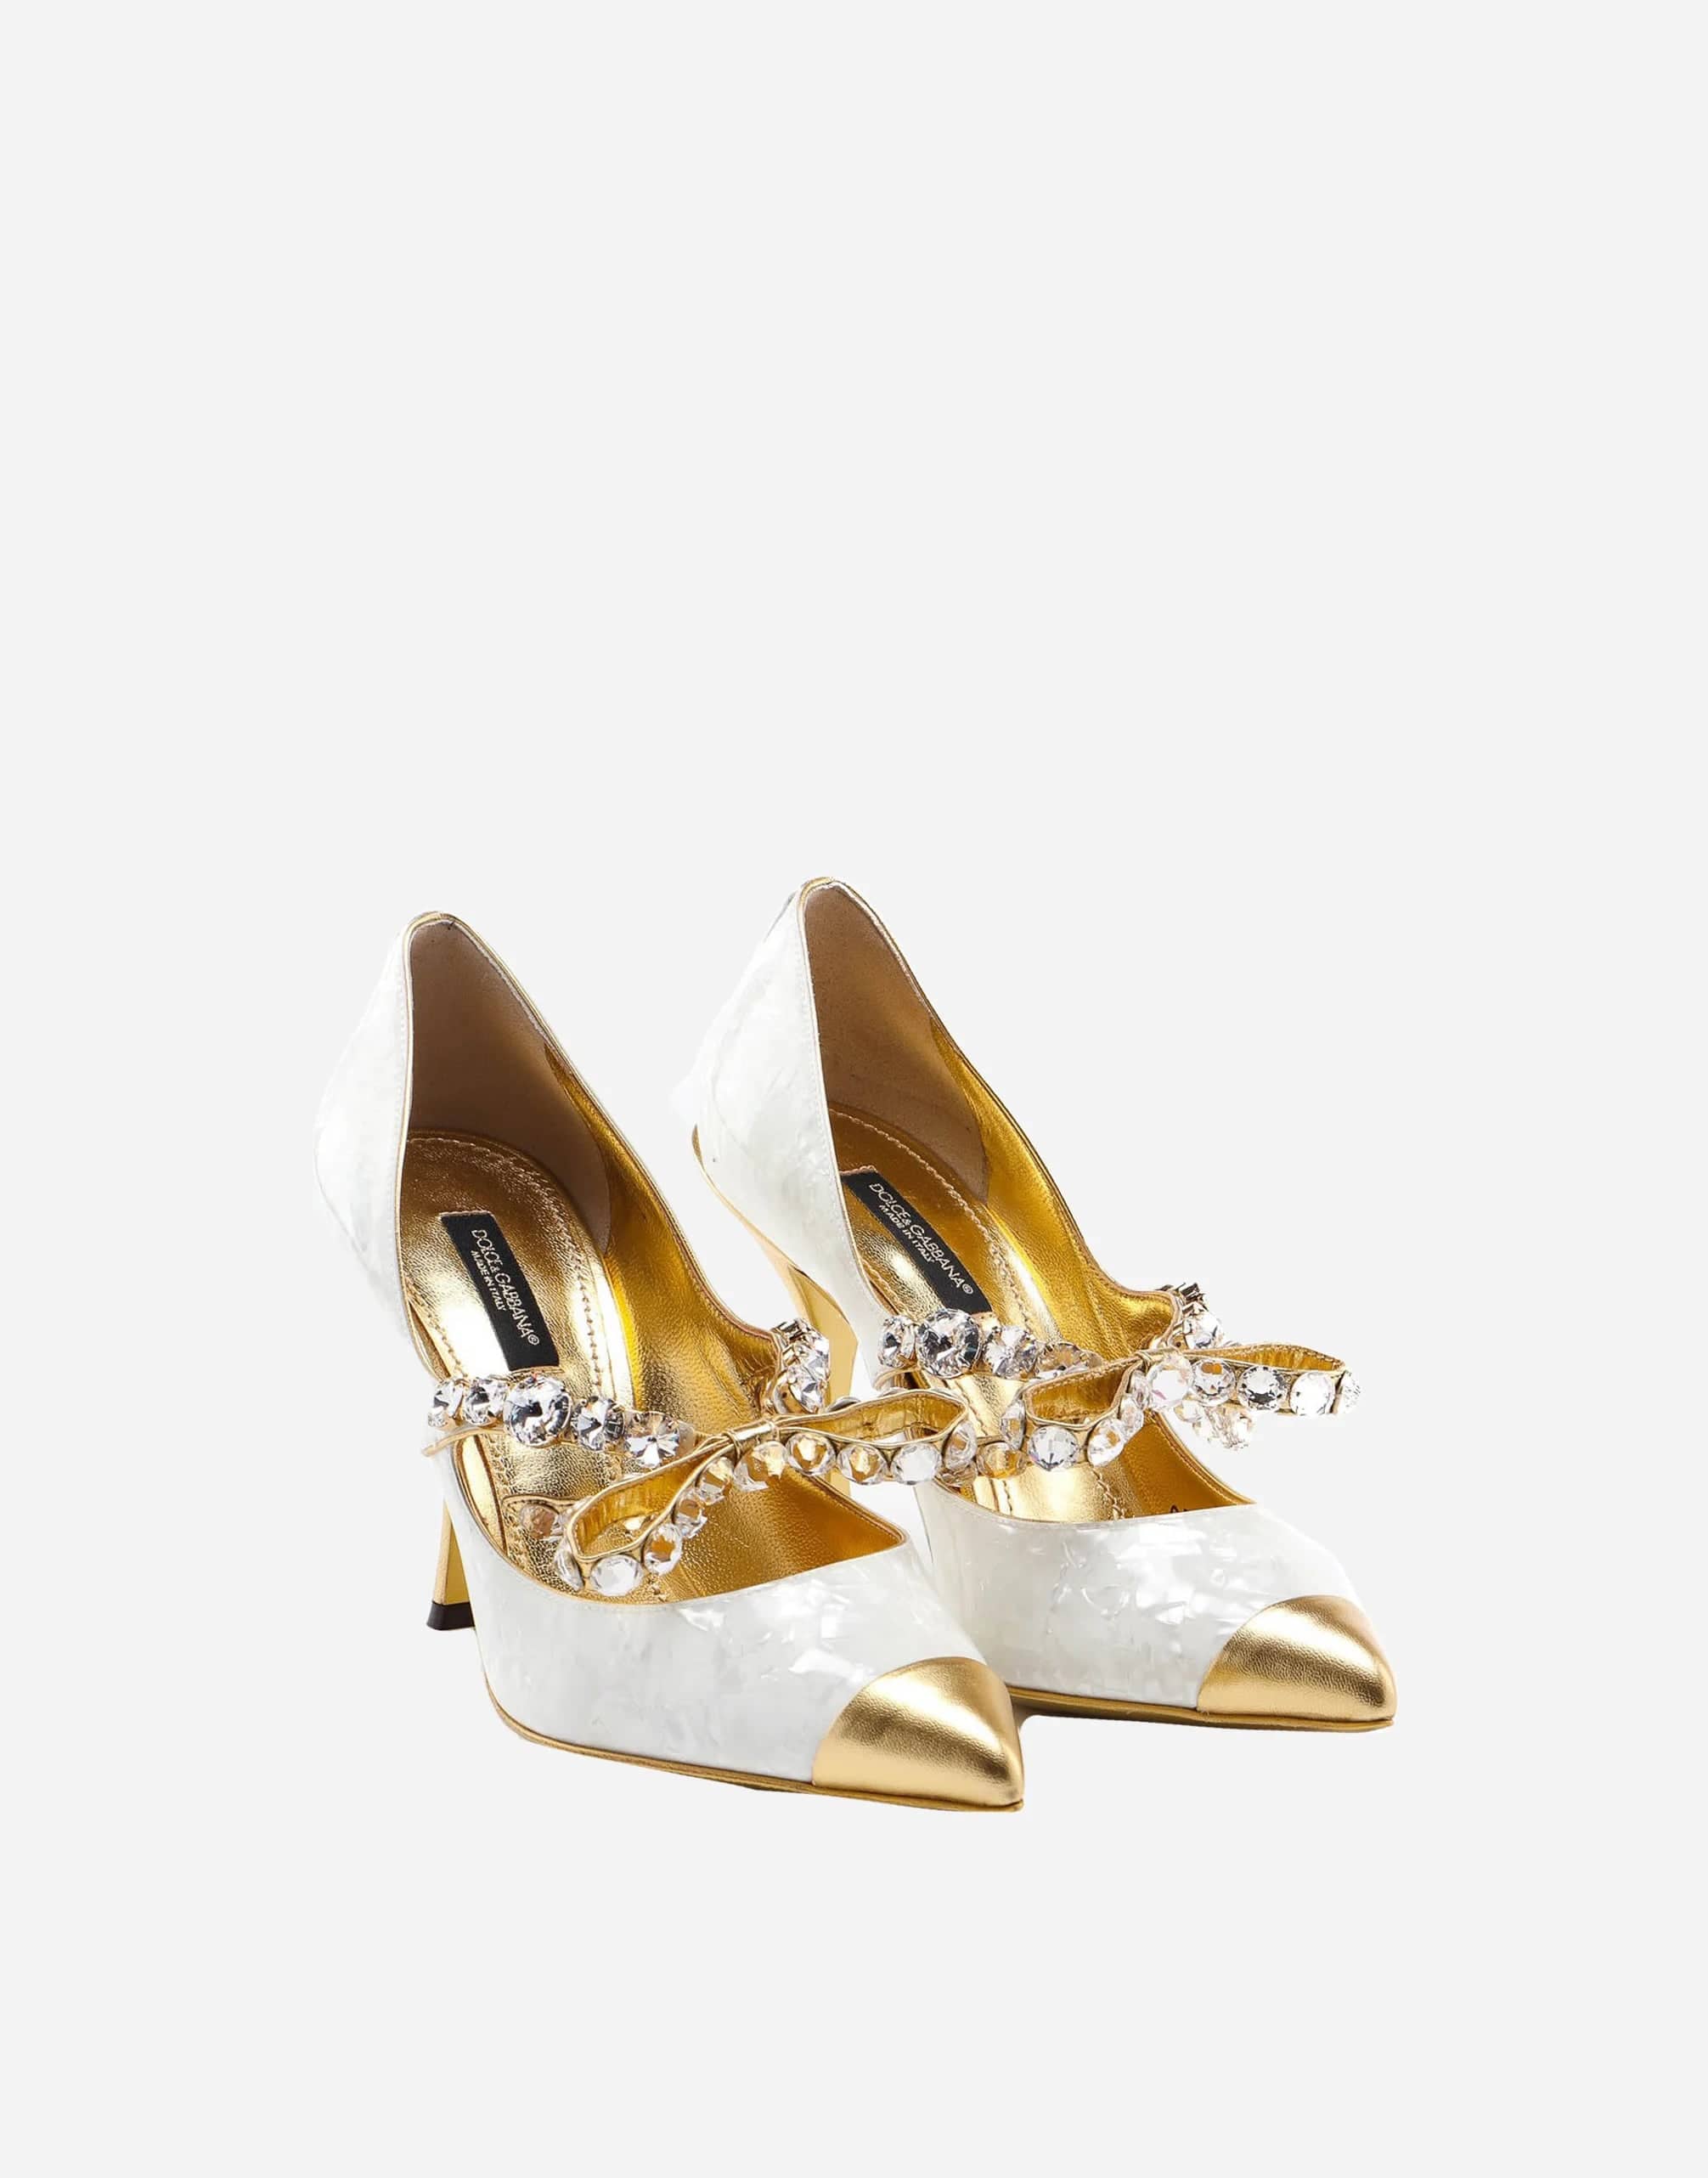 Dolce Gabbana Gold Heels Photos, Download The BEST Free Dolce Gabbana Gold  Heels Stock Photos & HD Images